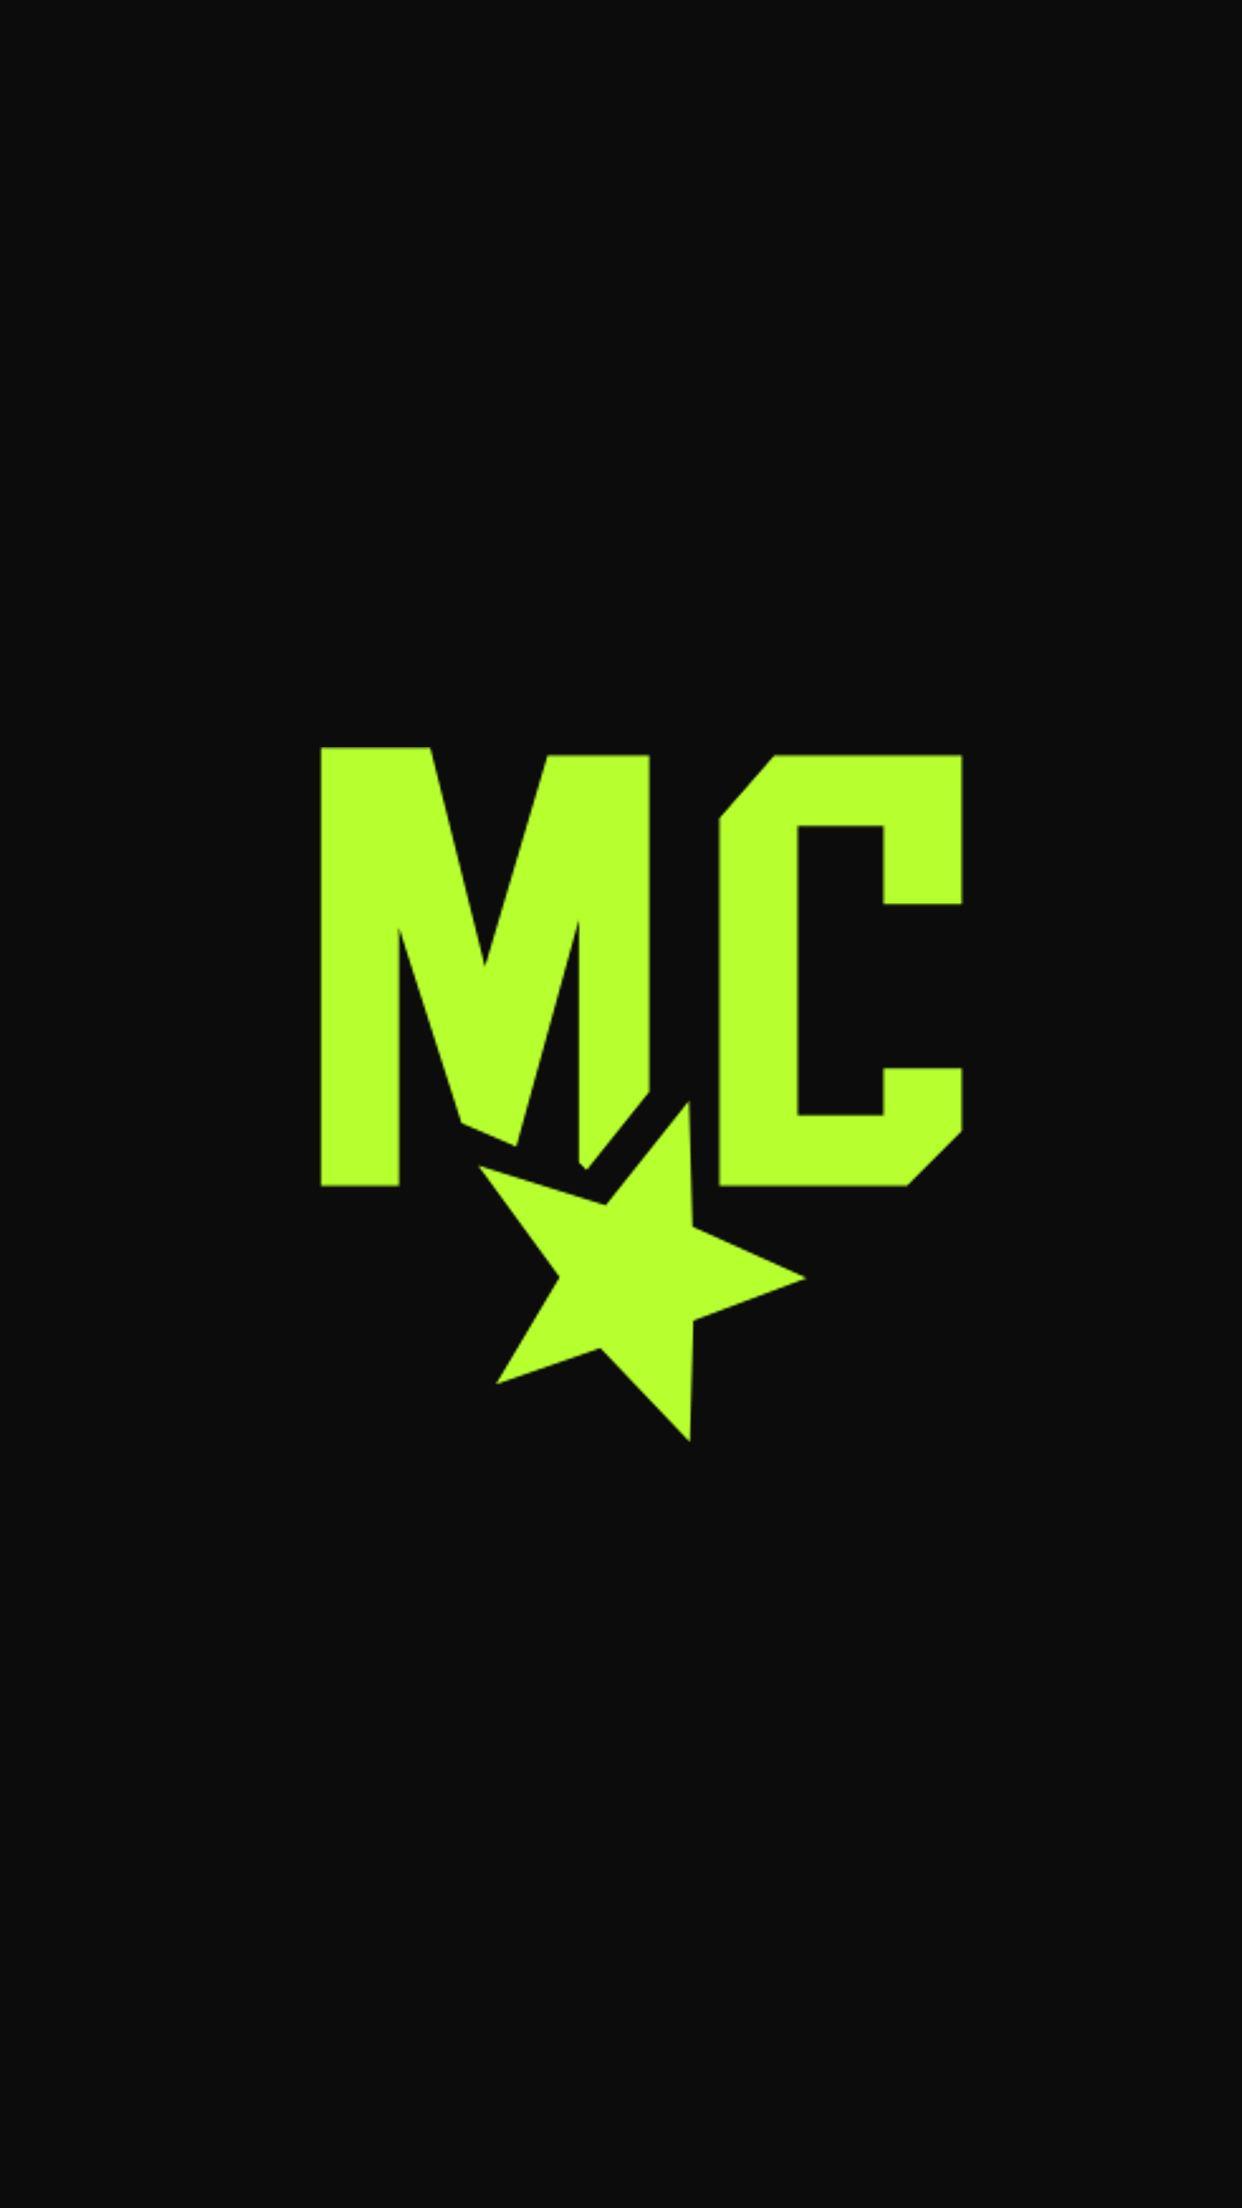 MCProHosting for Android - APK Download